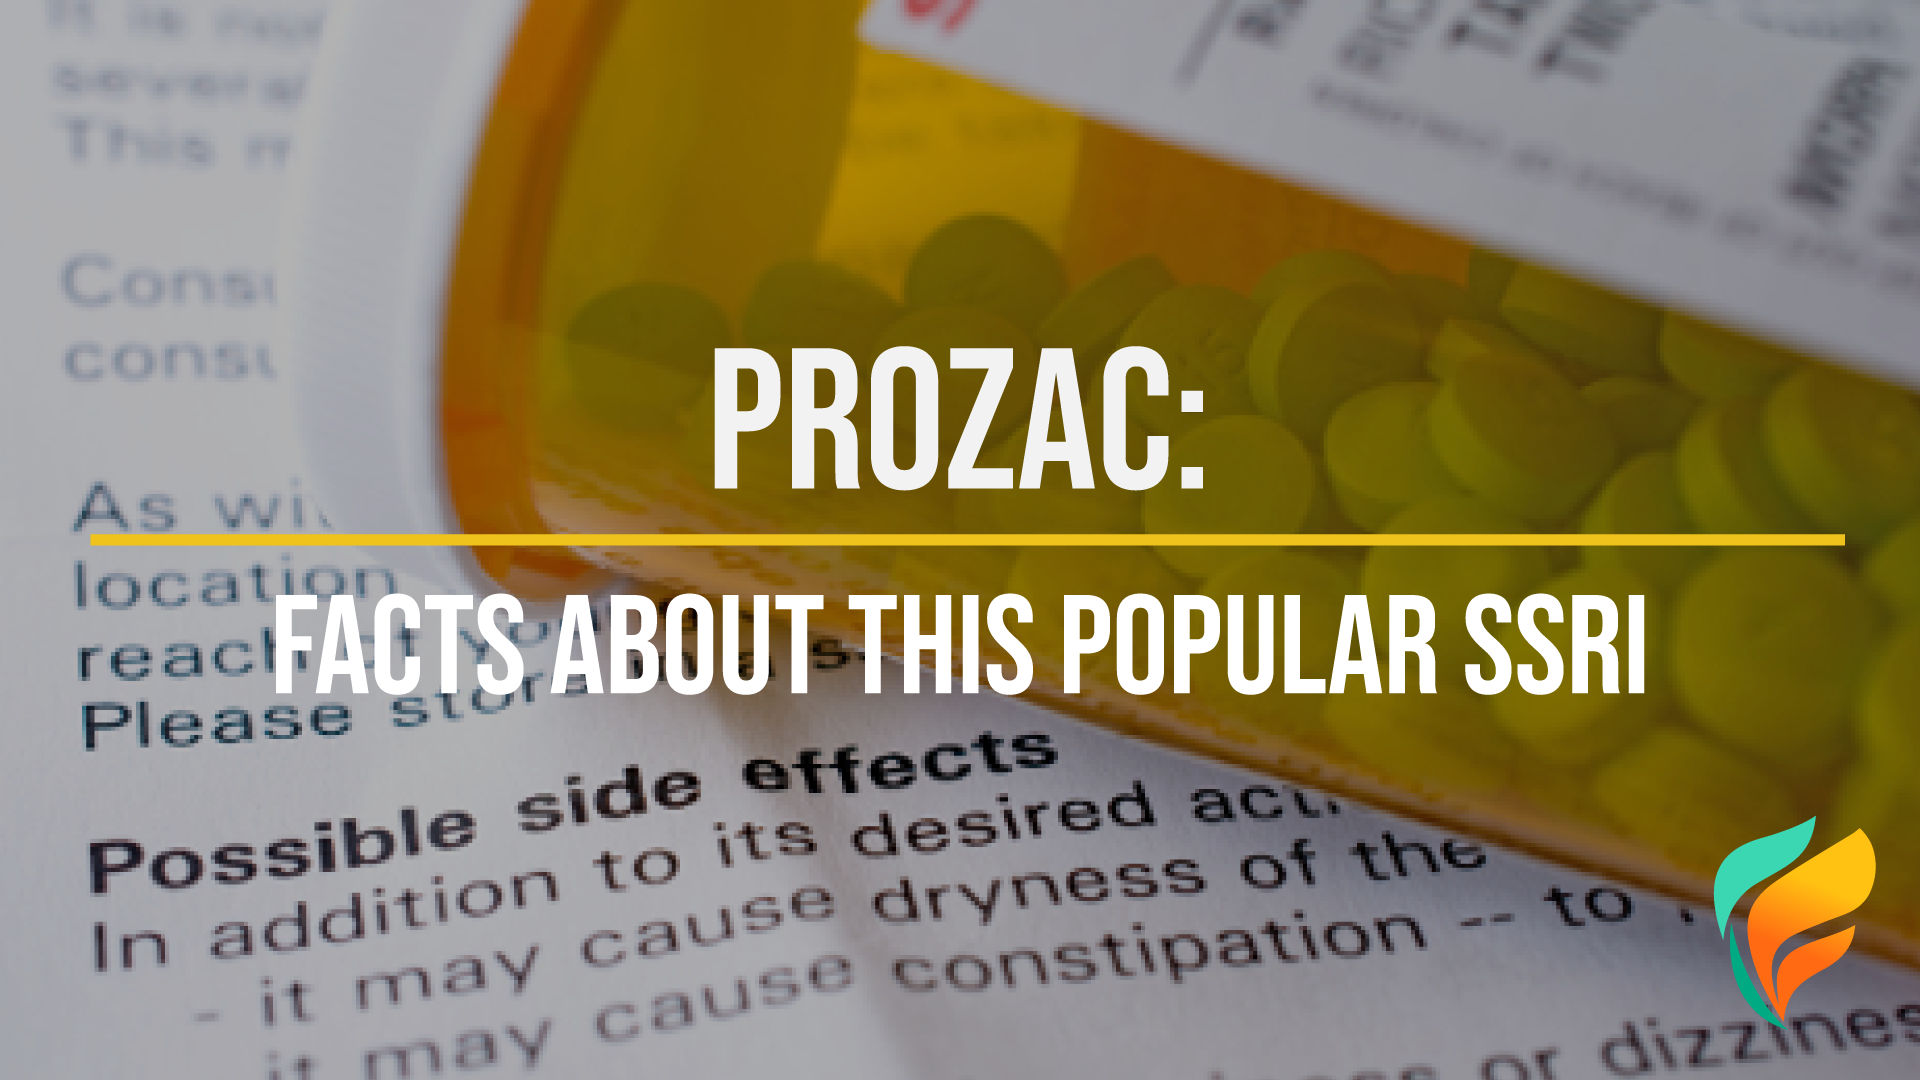 What is Prozac?